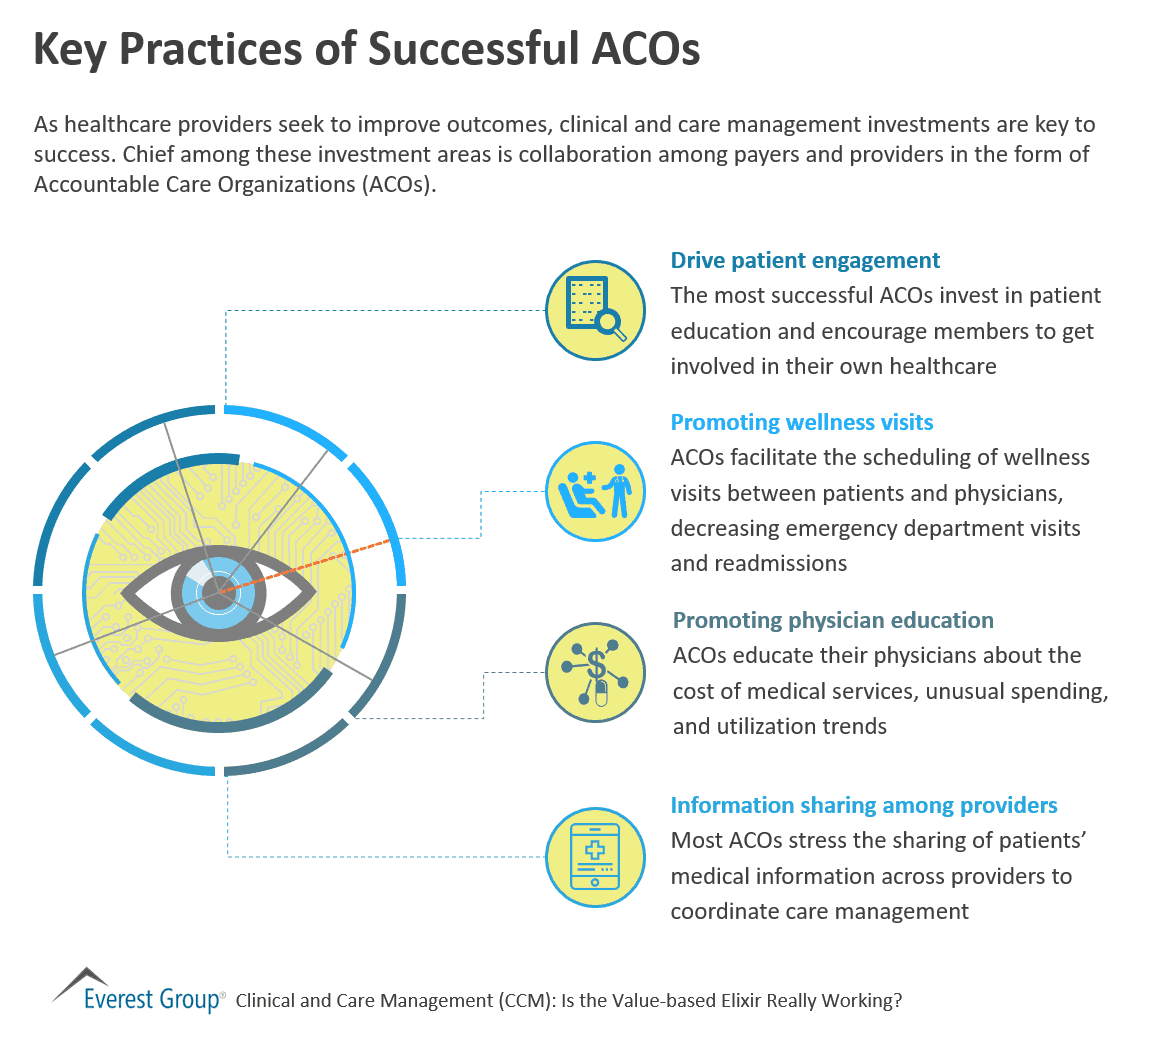 Key Practices of Successful Accountable Care Organizations (ACOs)